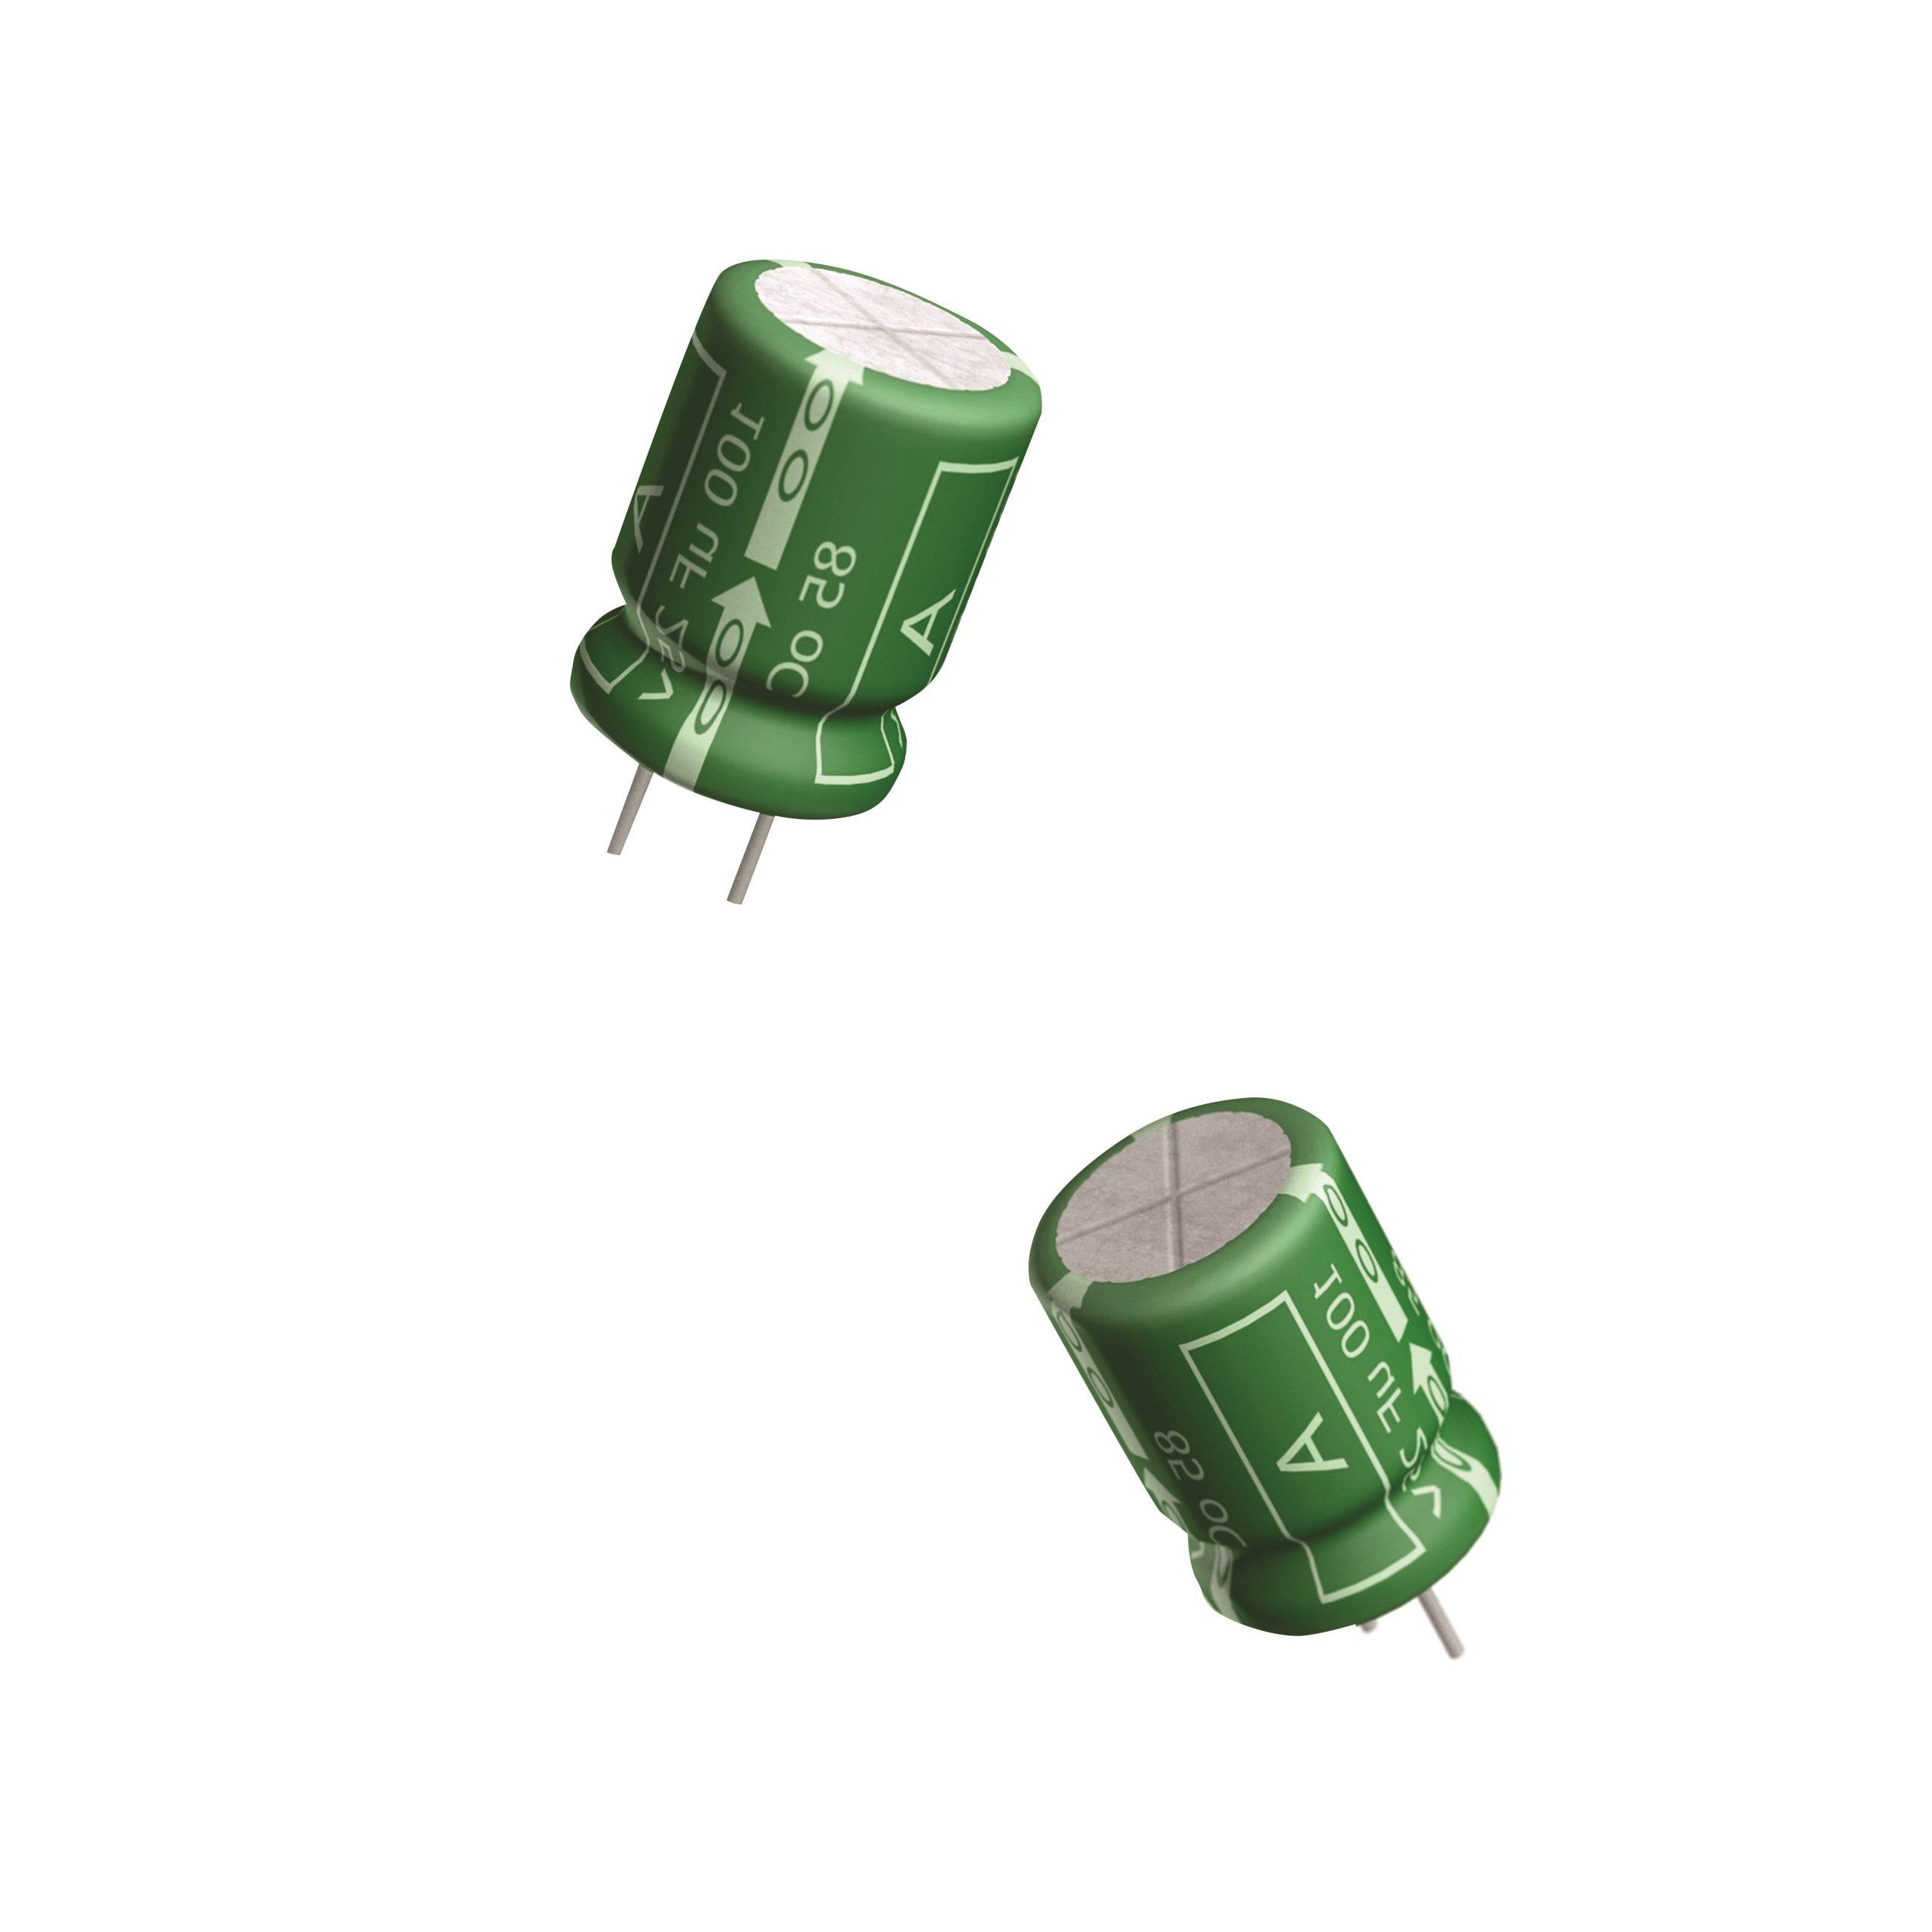 two green capacitor